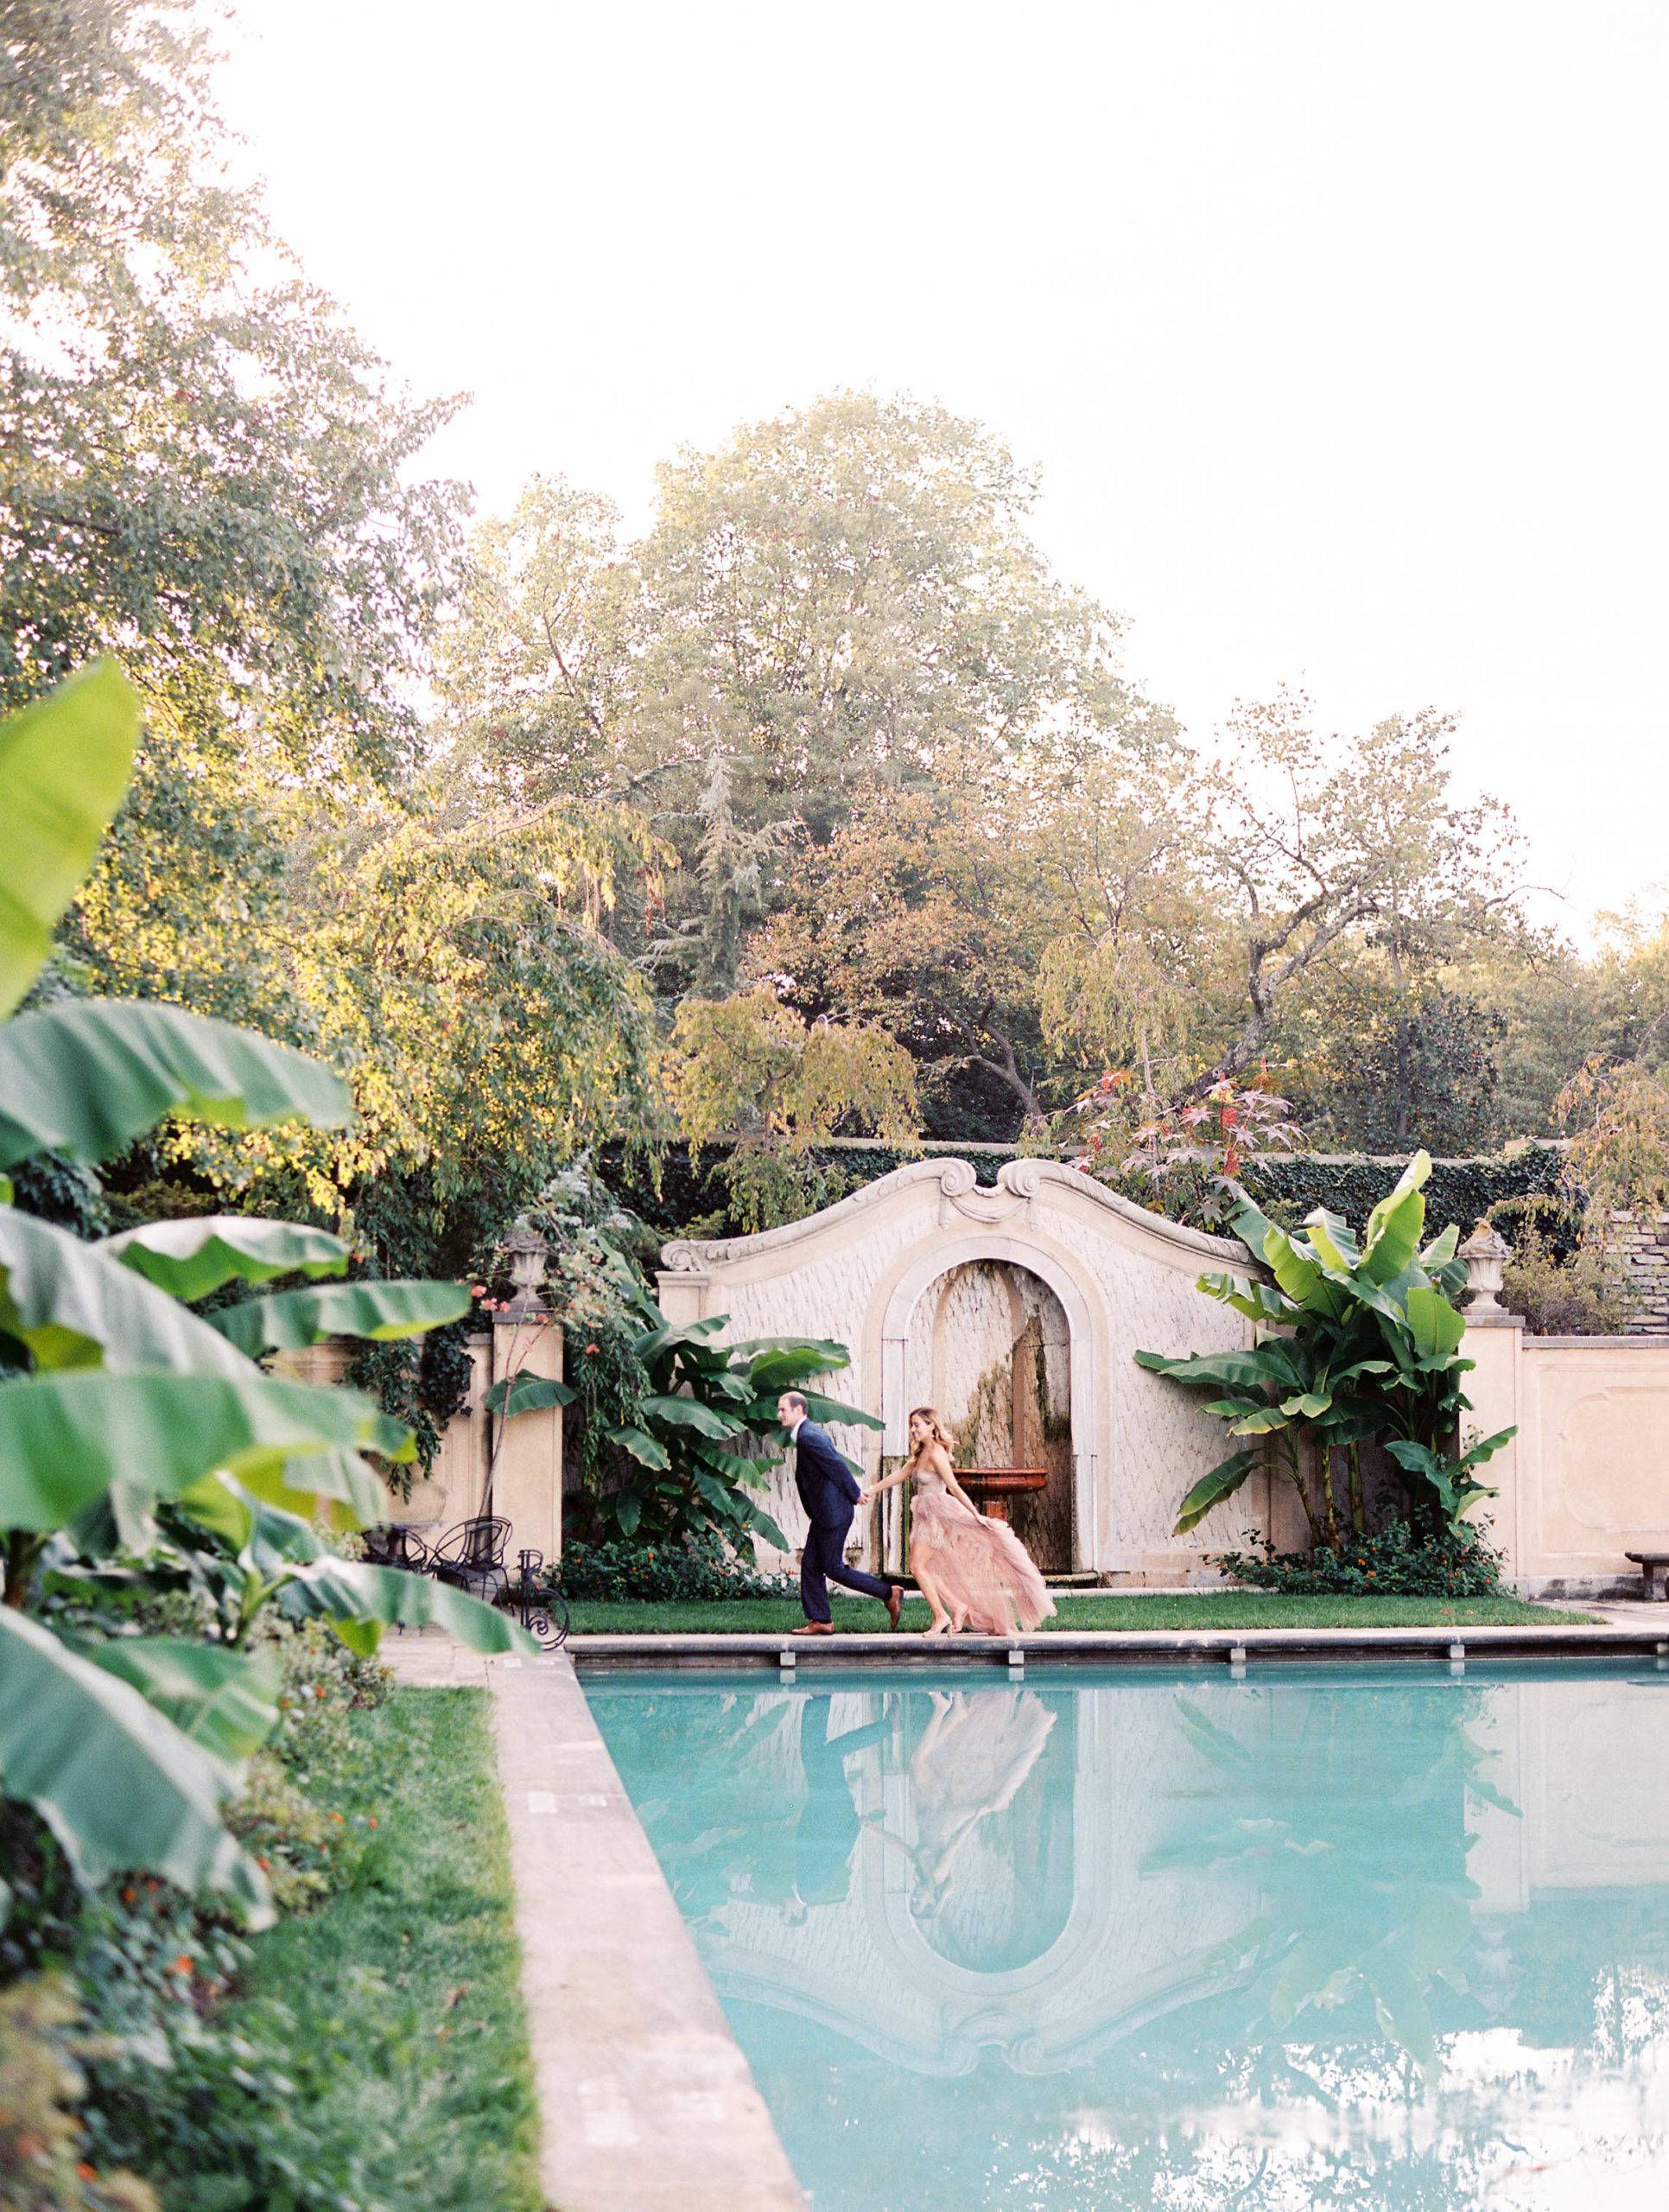 Couple running next to a pool in a tulle gown for engagement photos.